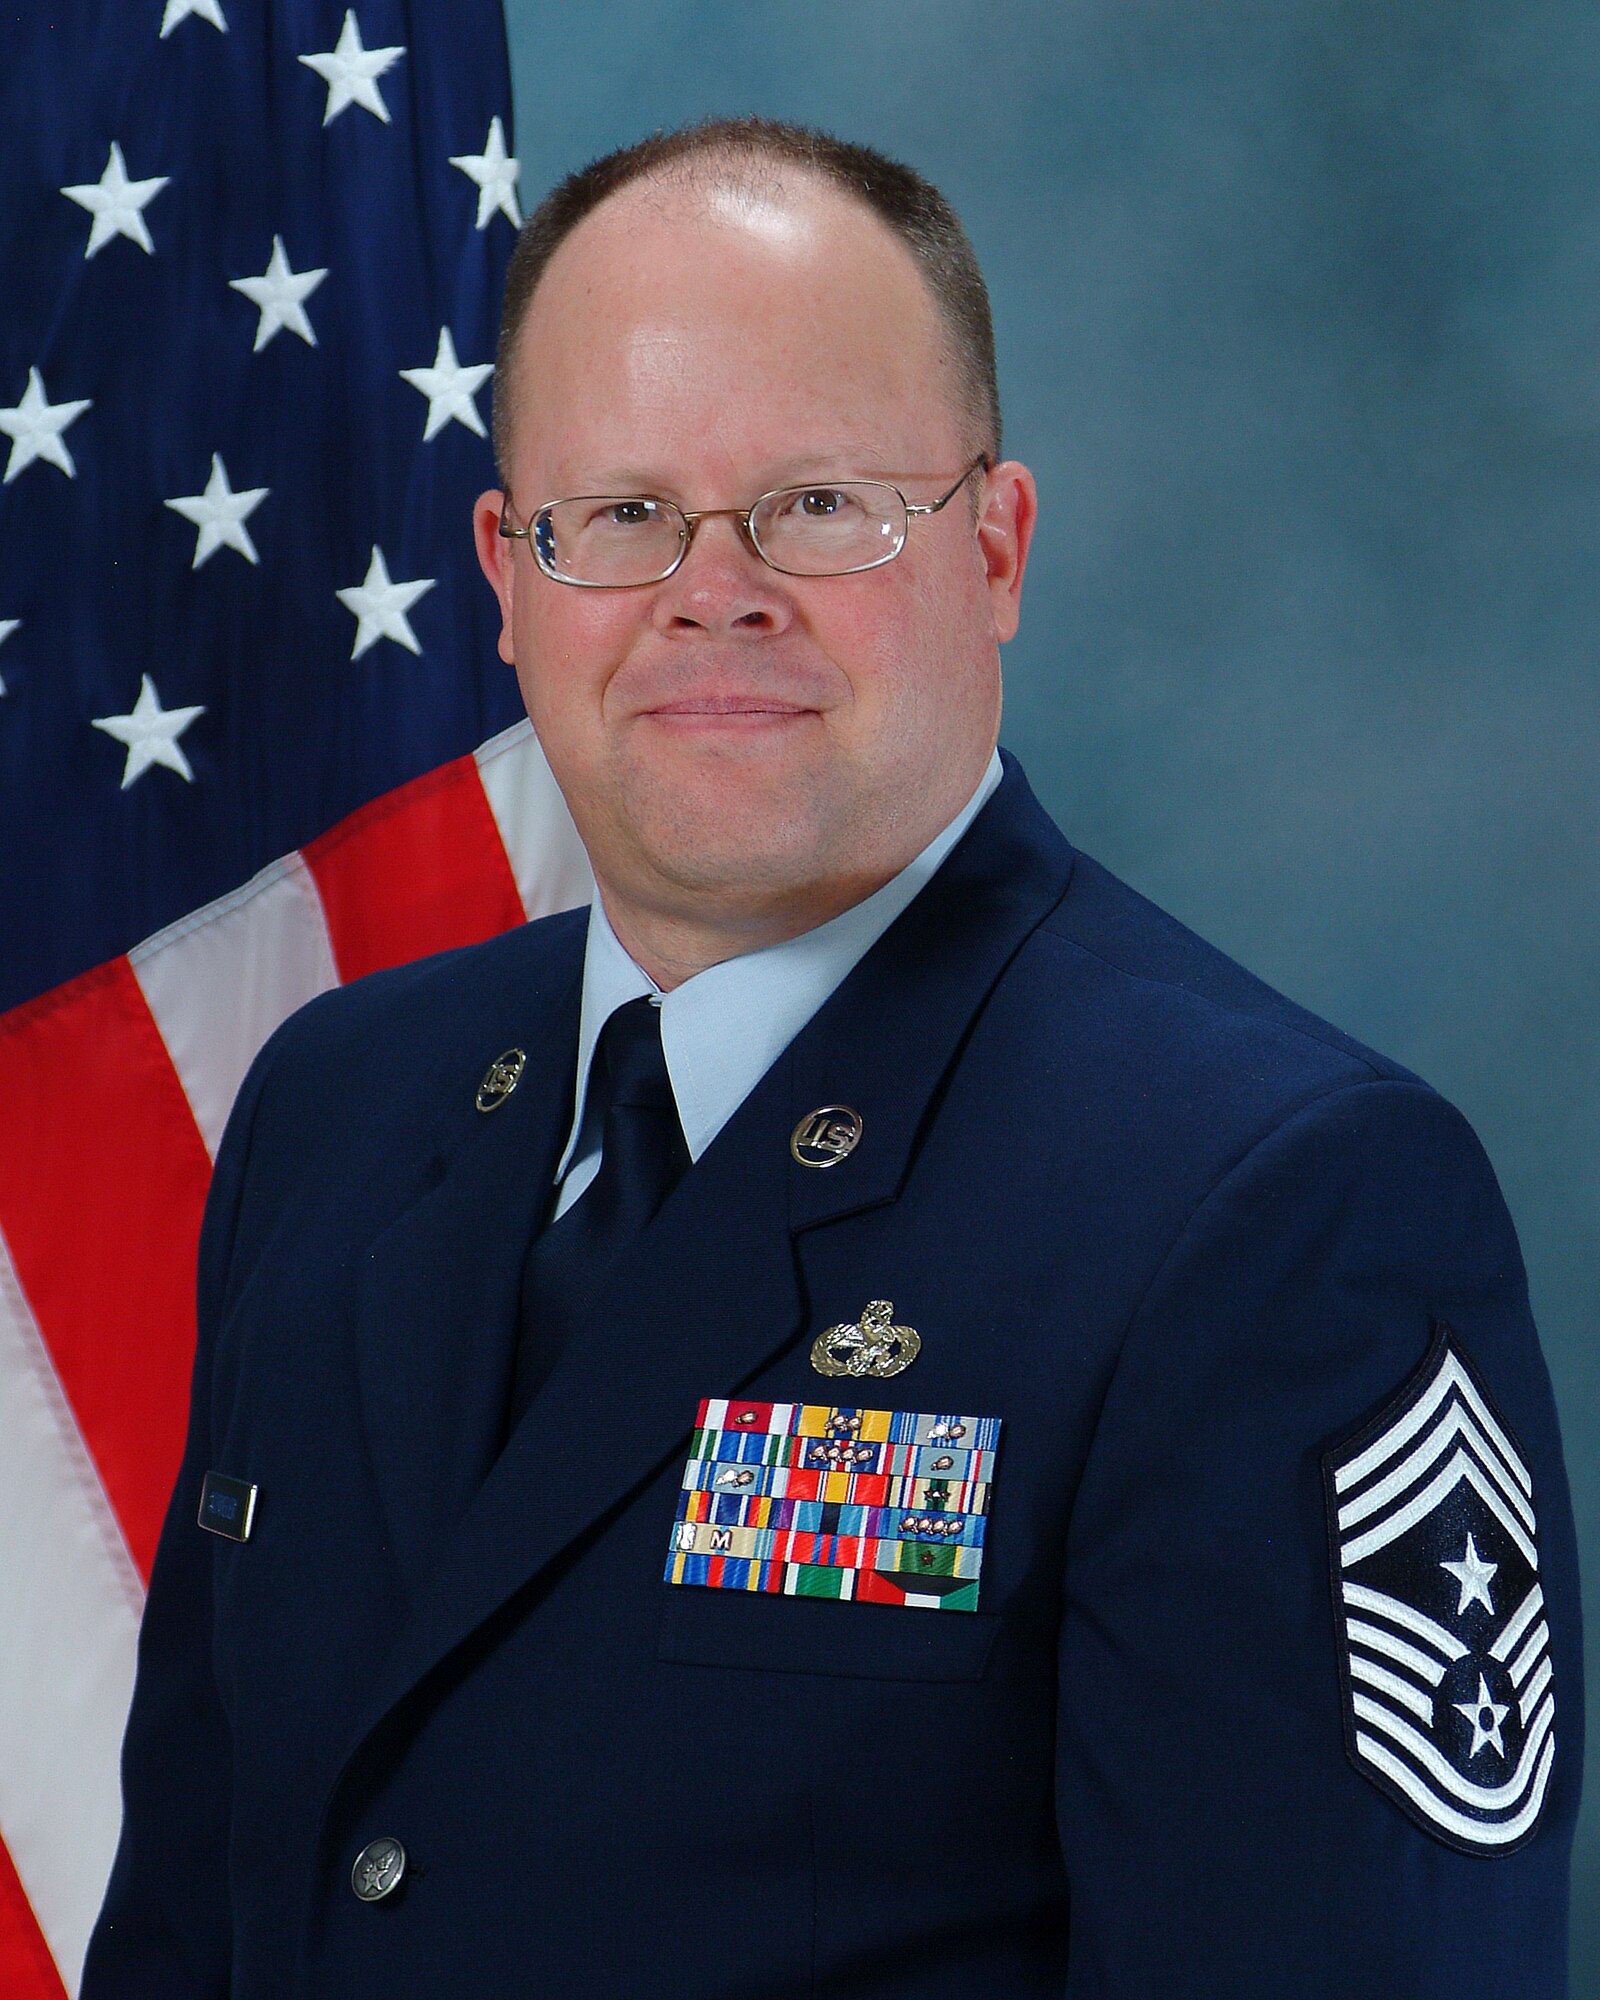 Chief Master Sgt. (ret.) Kirby Schueler, the 302nd Airlift Wing's former command chief from October 2005 to January 2009. (U.S. Air Force photo)